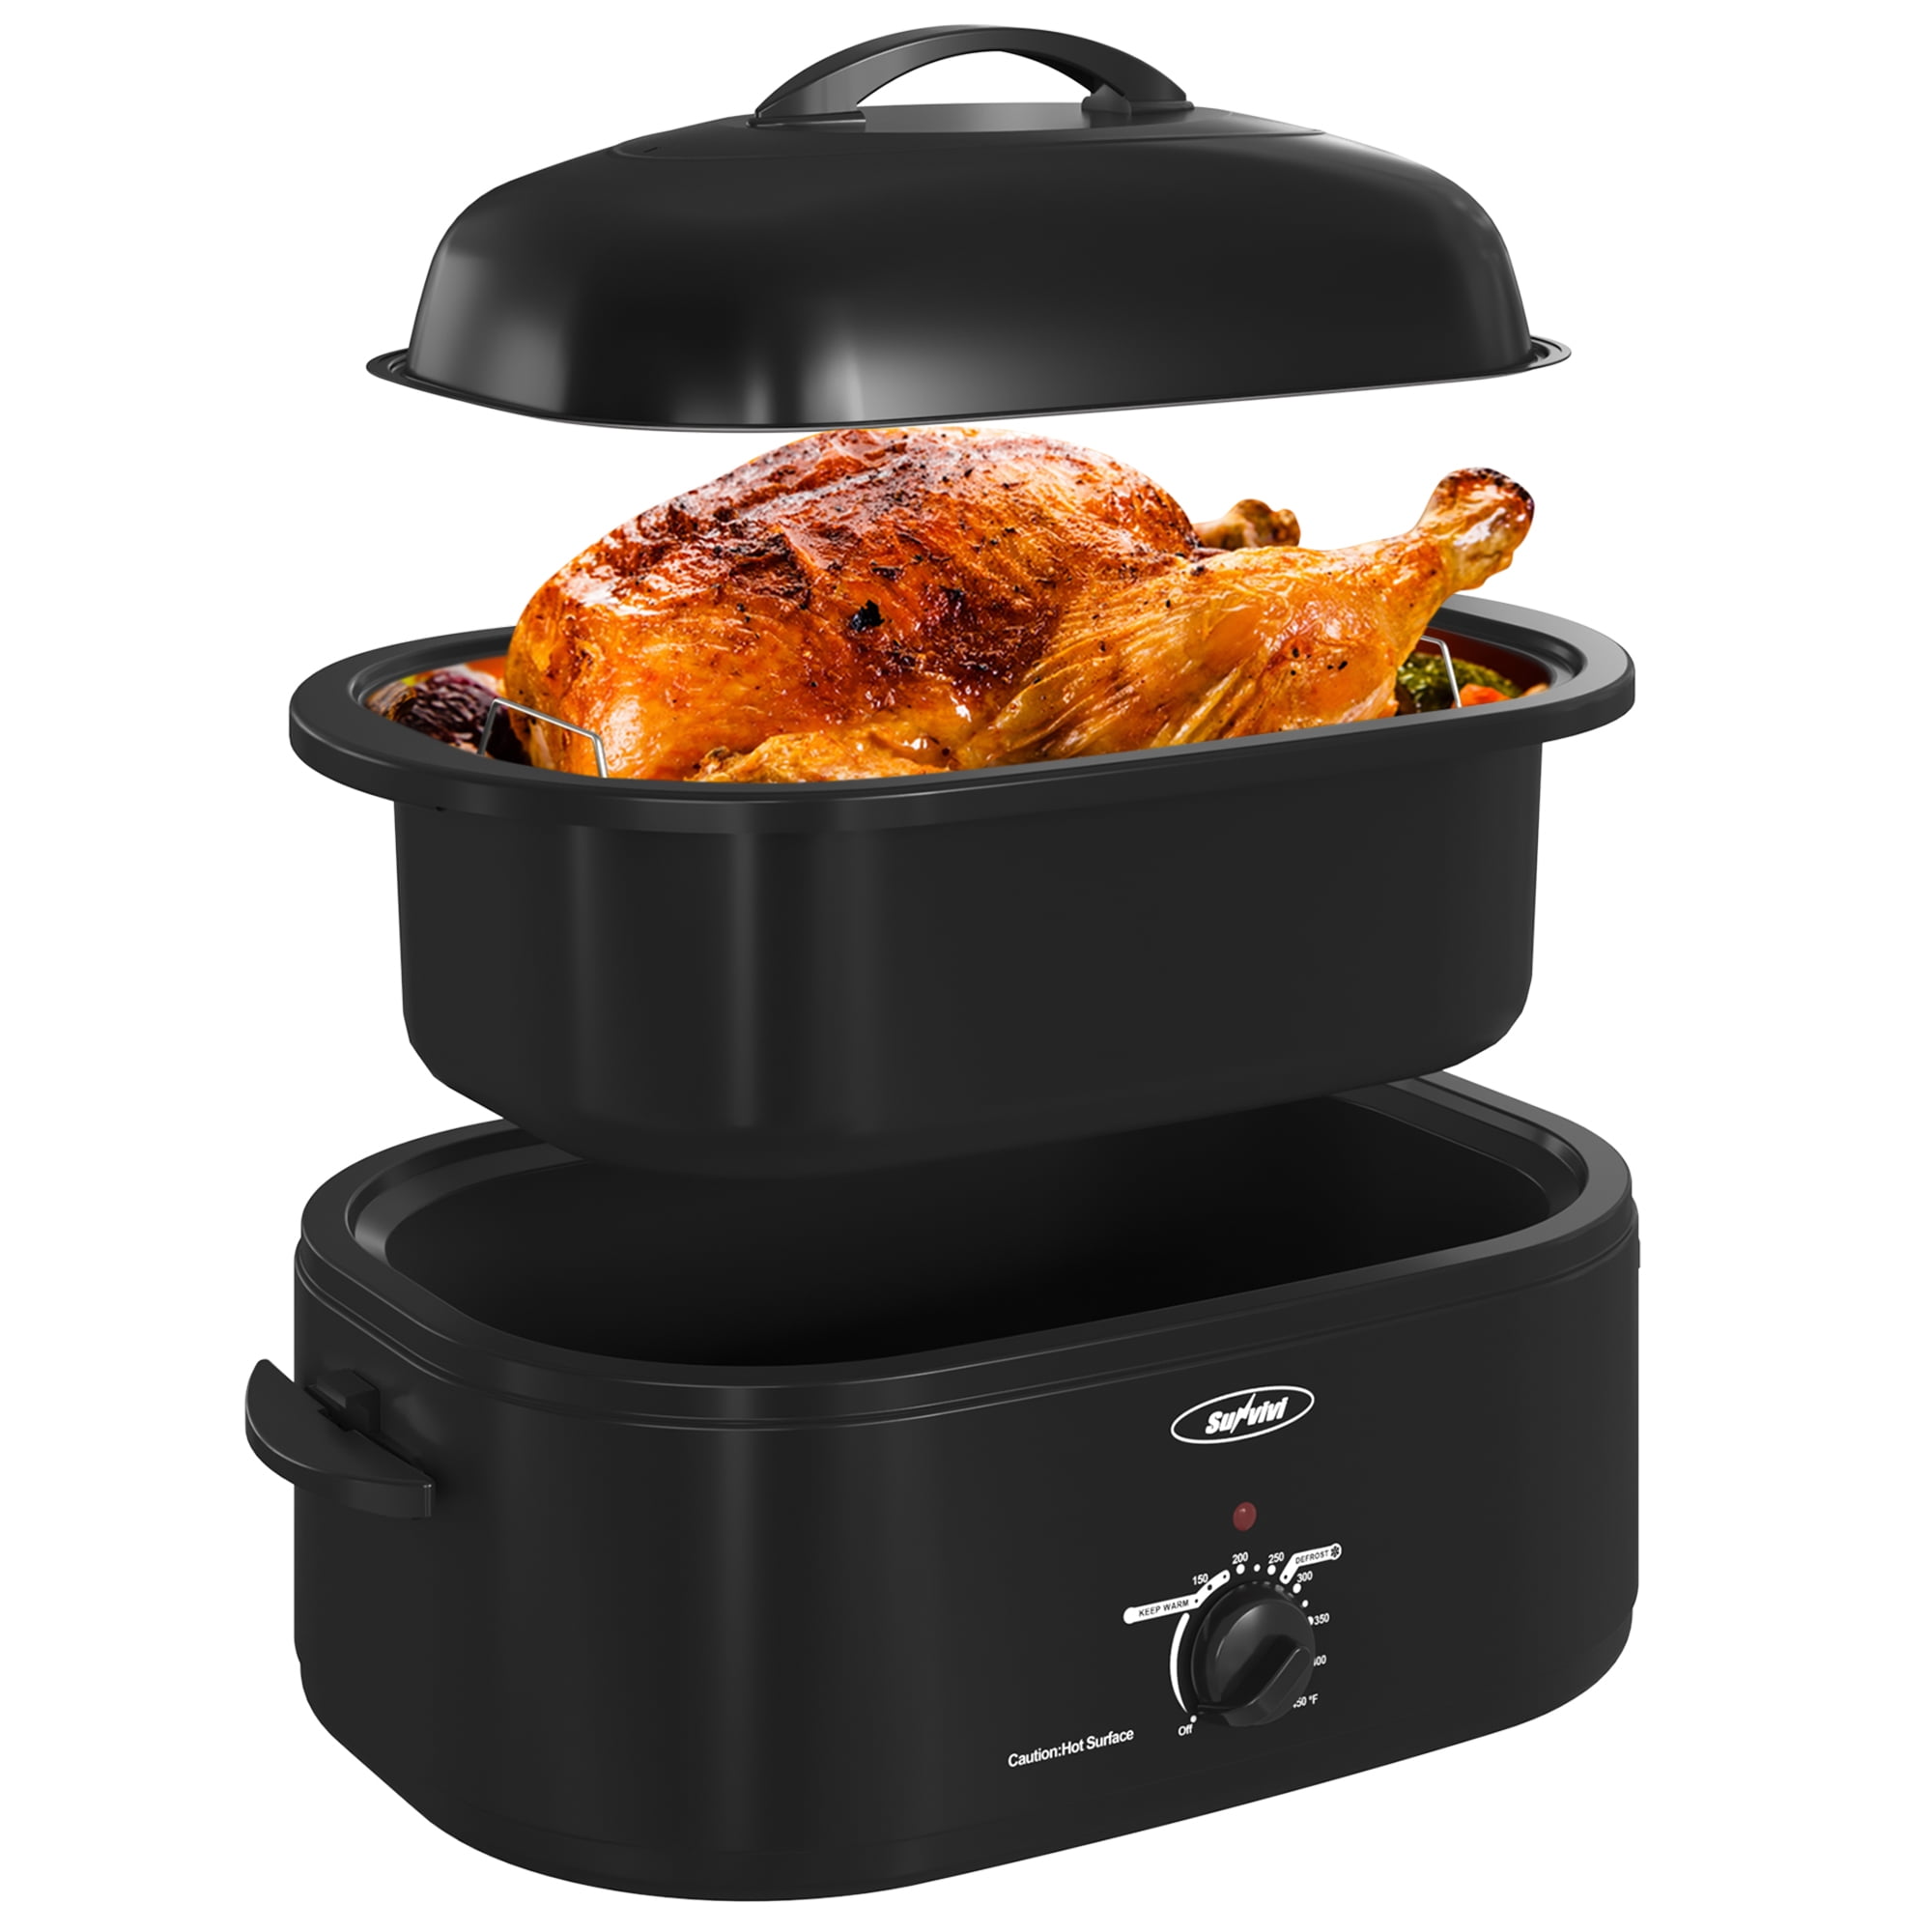 NutriChef PKRT97 Oven Review: Great for Rotisserie